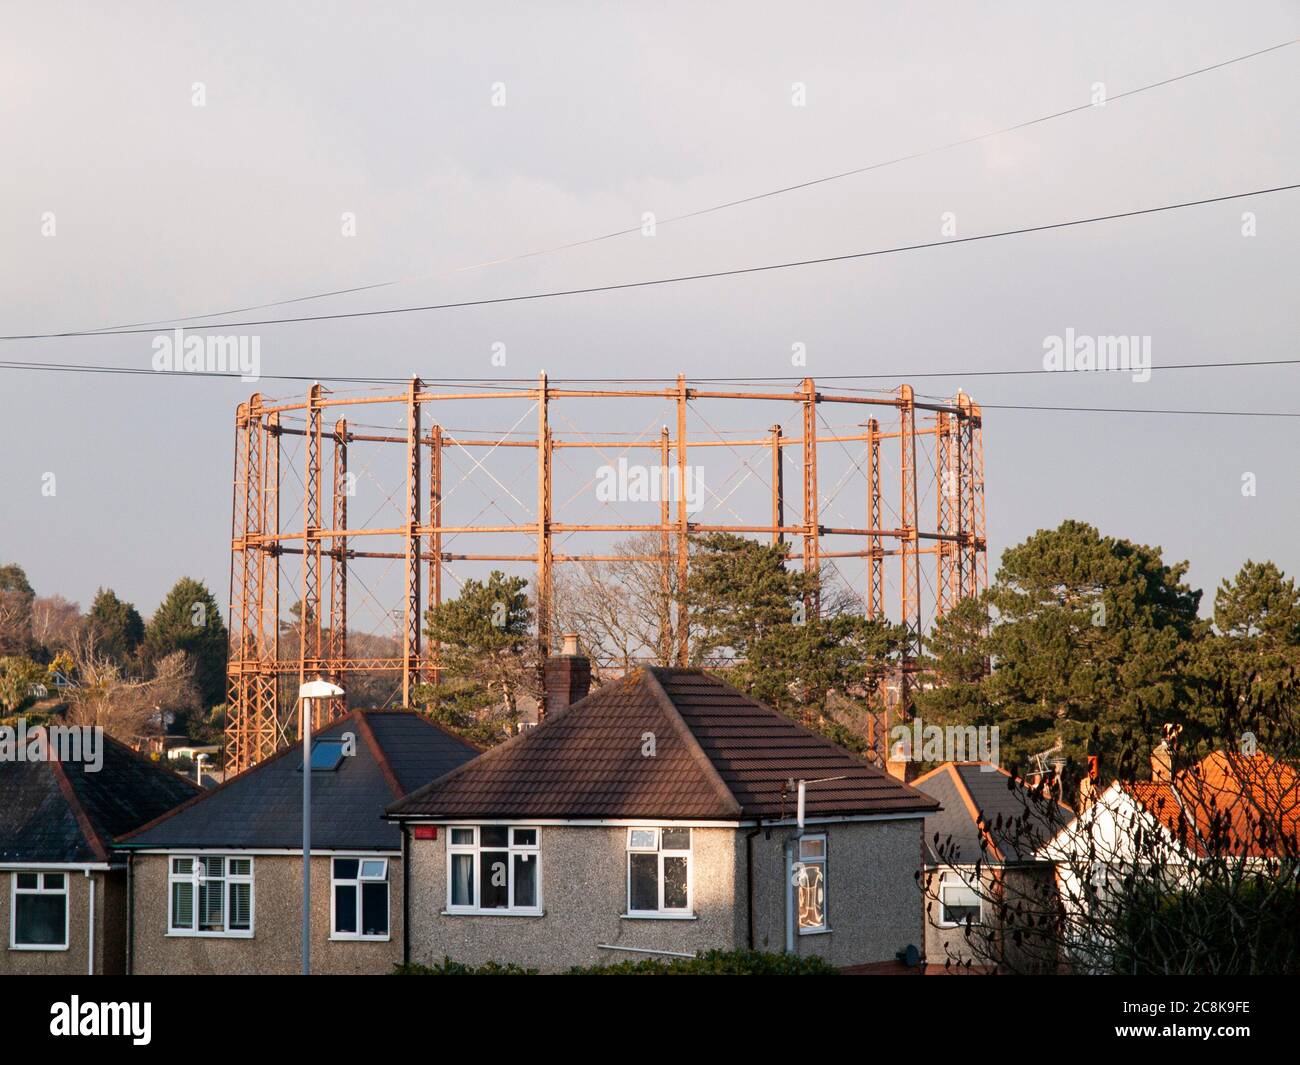 A view of the now demolished cast iron gas holder at Branksome, Poole, England which was built early in the last century showing residential propertie Stock Photo